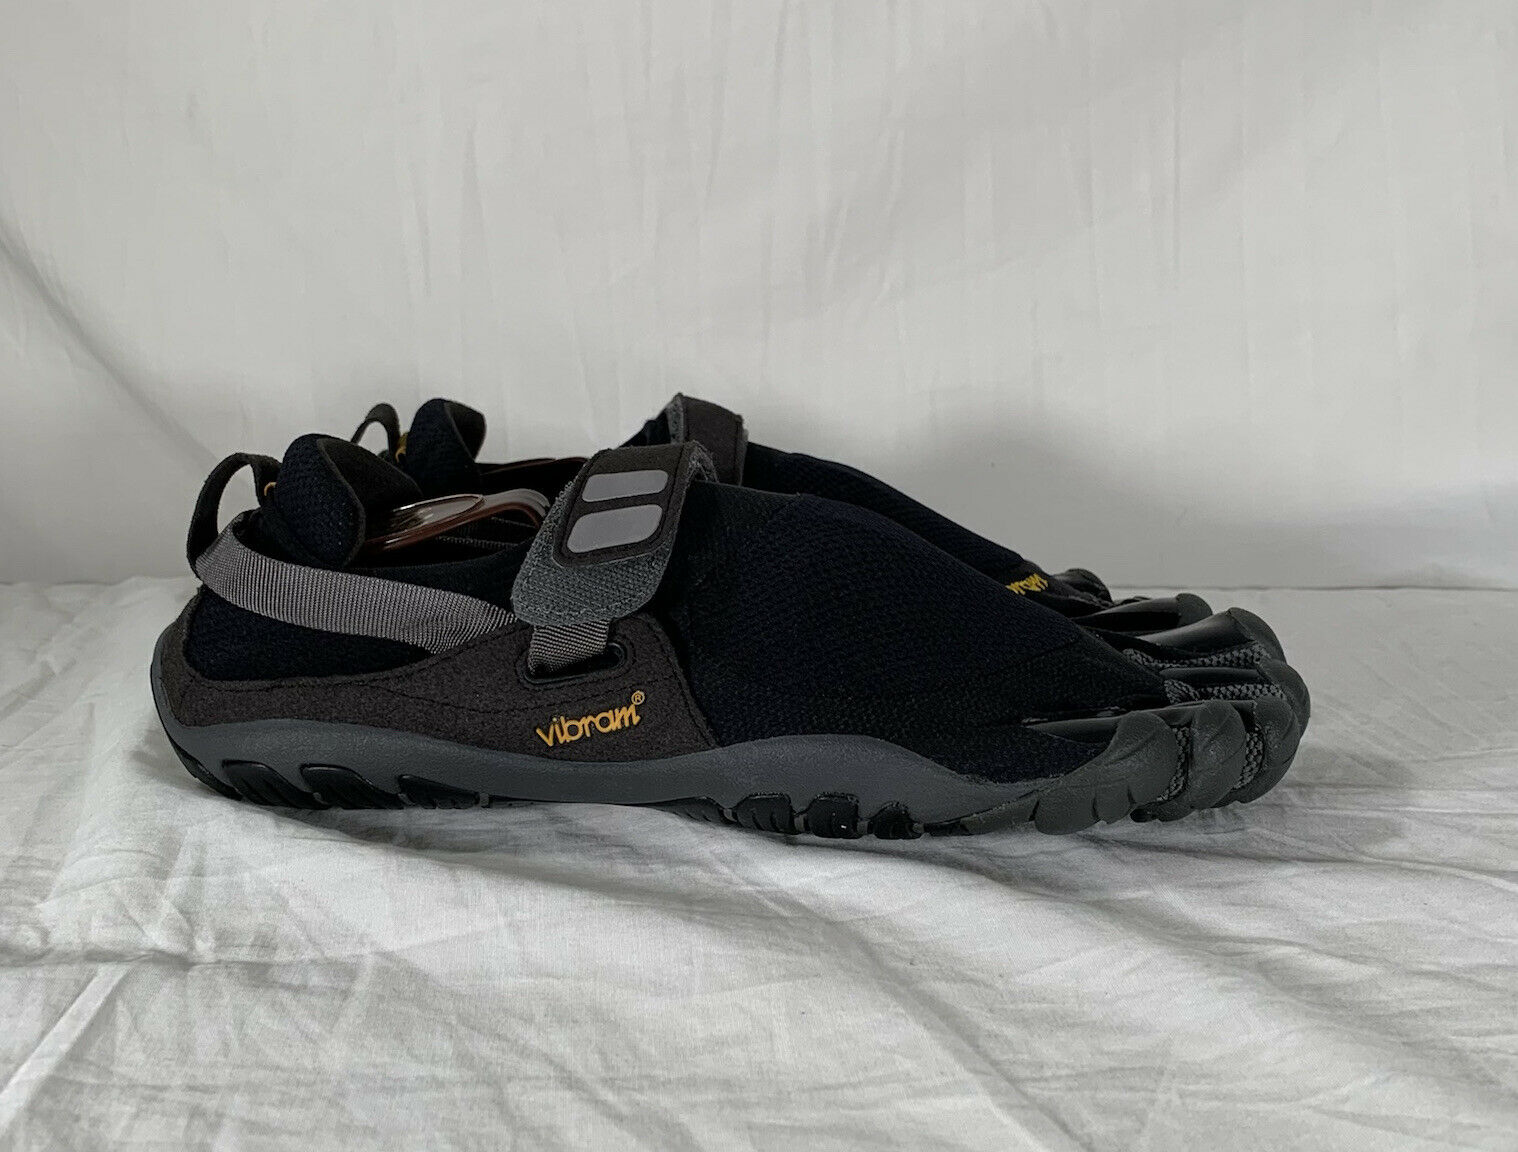 Read the Five Finger Vibram Review - Walking shoe for everyday use.